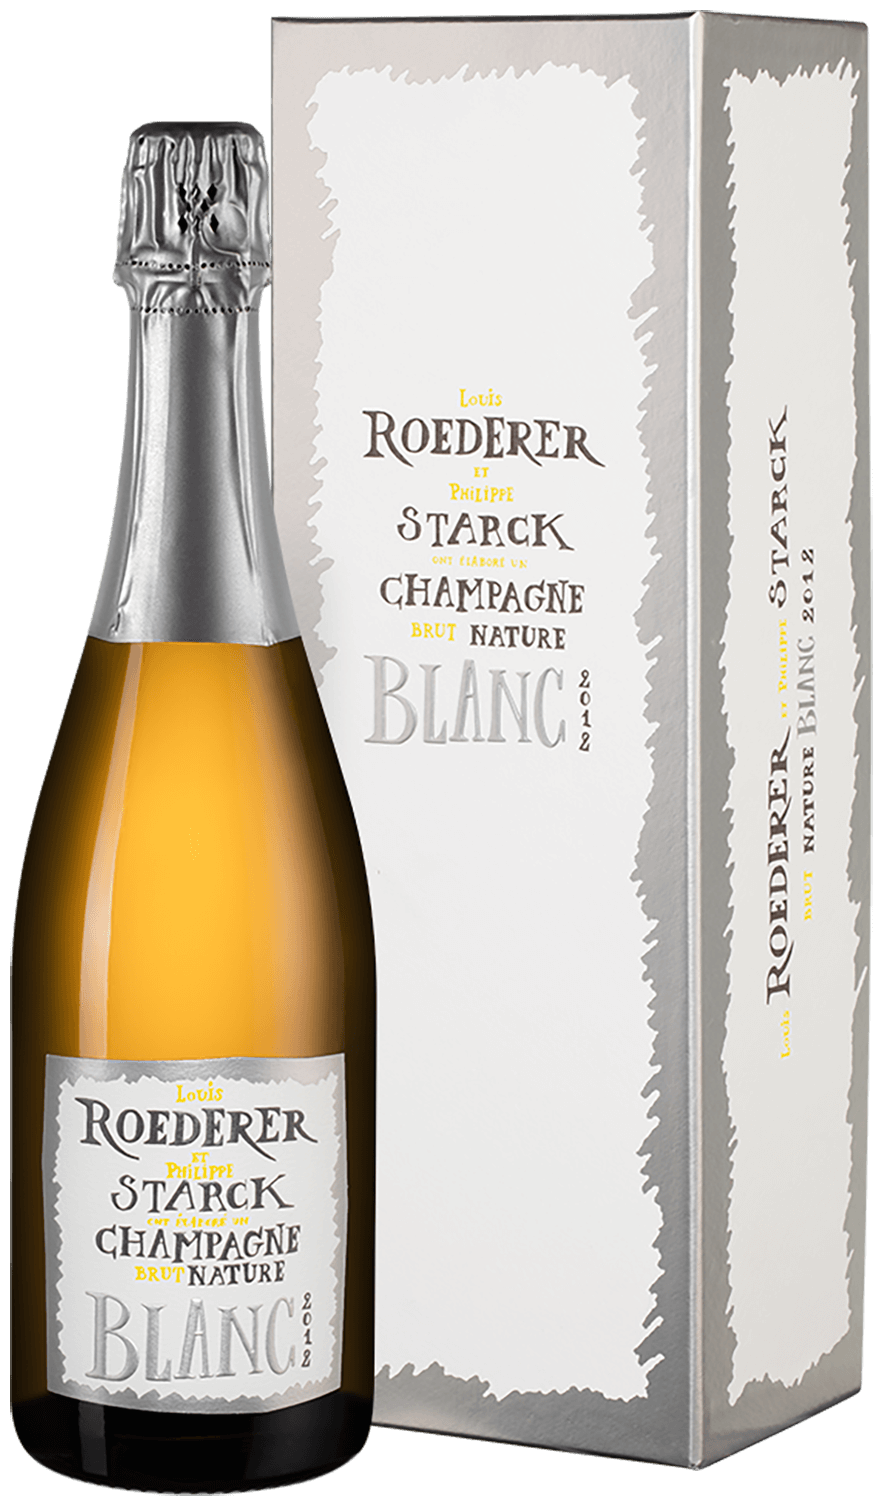 Brut Nature Champagne AOC Louis Roederer (gift box) carte blanche champagne aoc louis roederer gift box